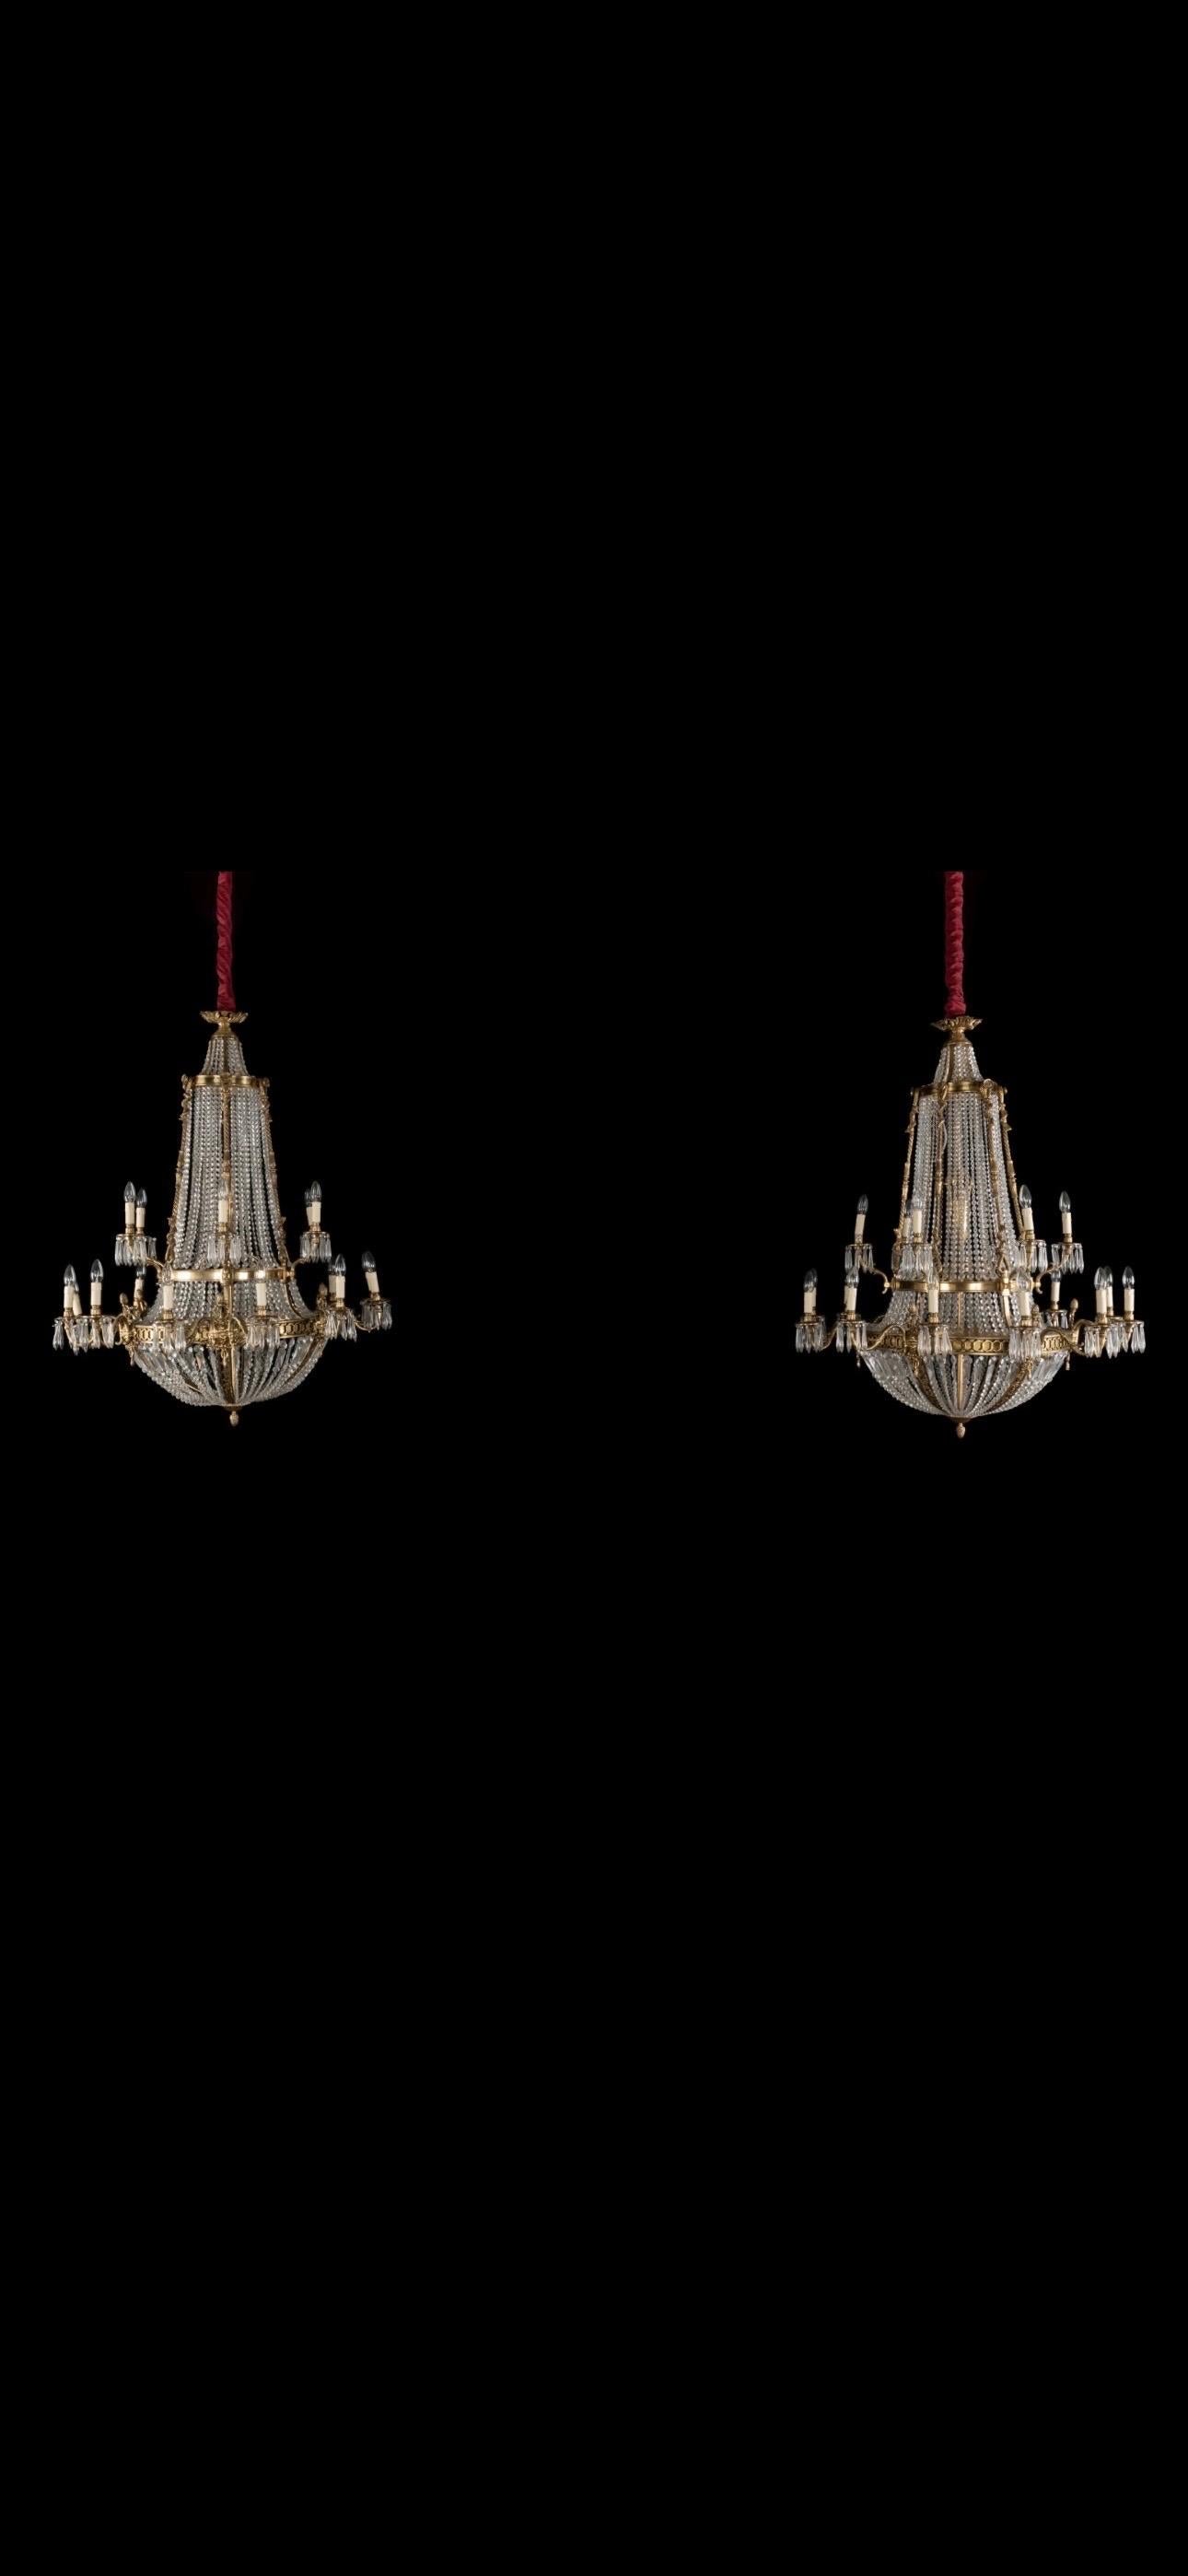 Here we have a rare opportunity to buy a matching pair of chandeliers used on the set of the CROWN tv show. 

Sold at auction by bonhams in February 2024, they fetched over £10’000 each. With people contacting the winning bidder after the show